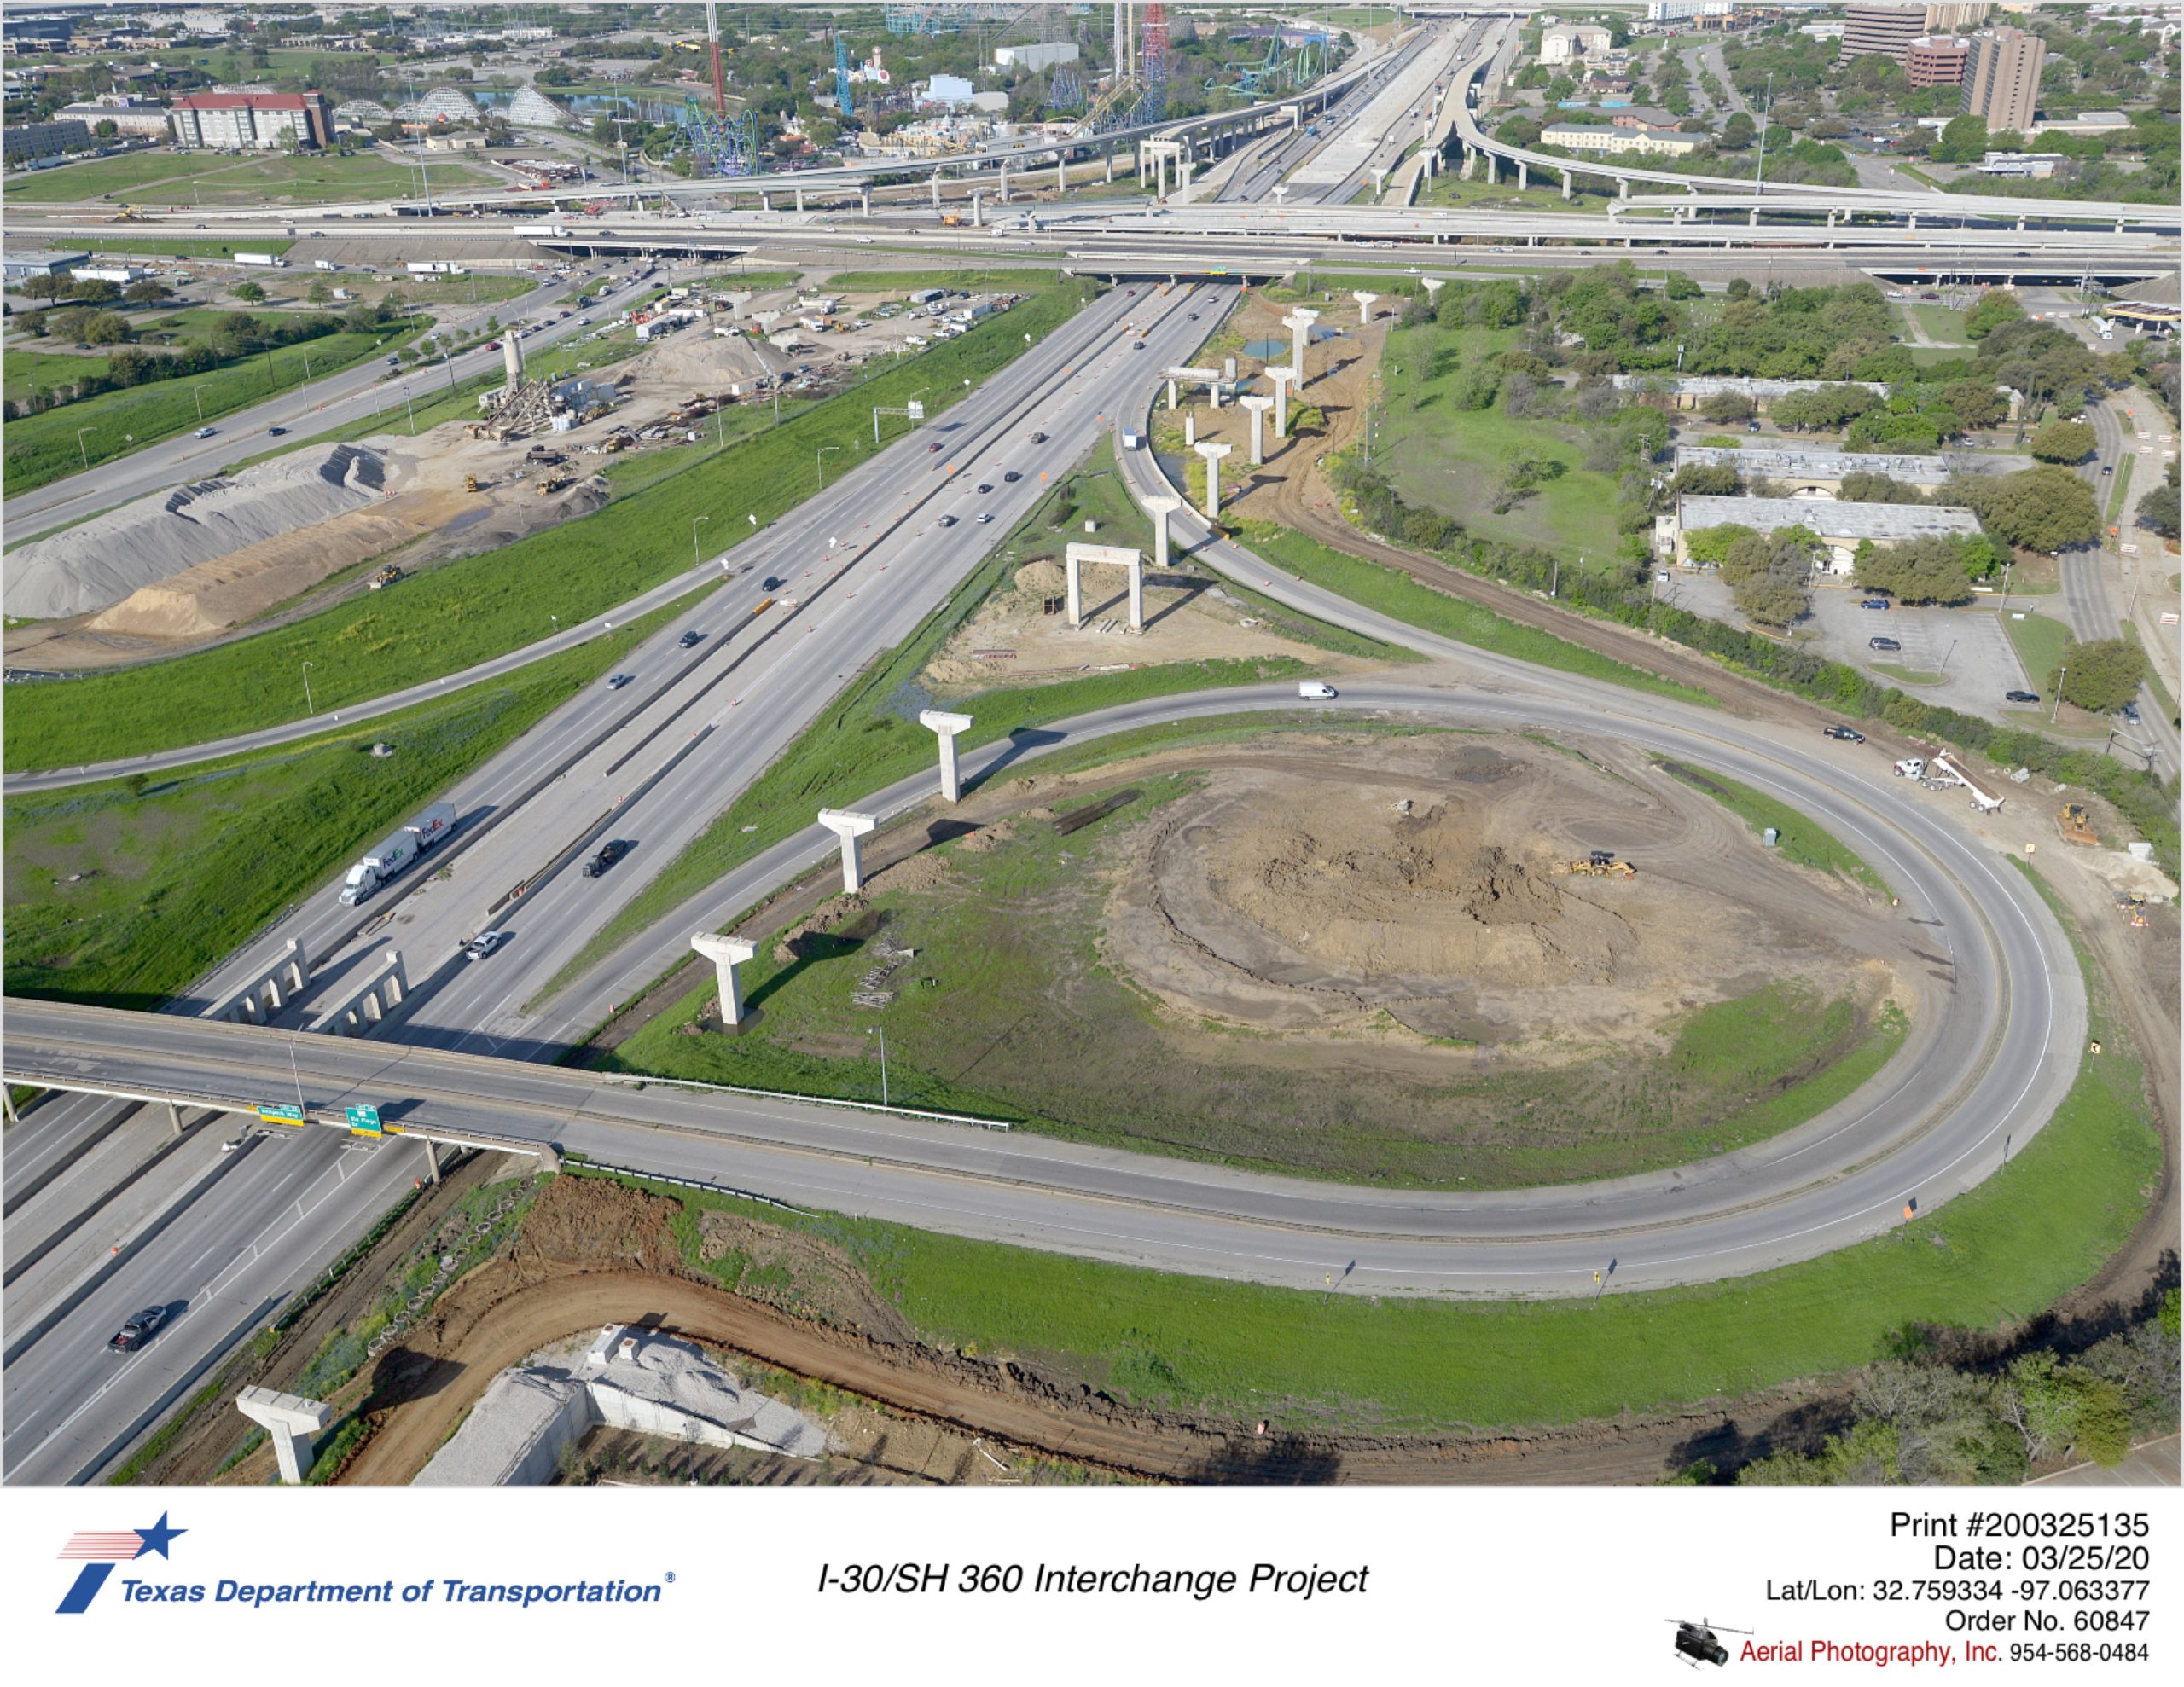 Six Flags Dr interchange with I-30 looking southwest. Bridge substructures for future westbound direct connectors to SH 360 shown along north side of I-30.